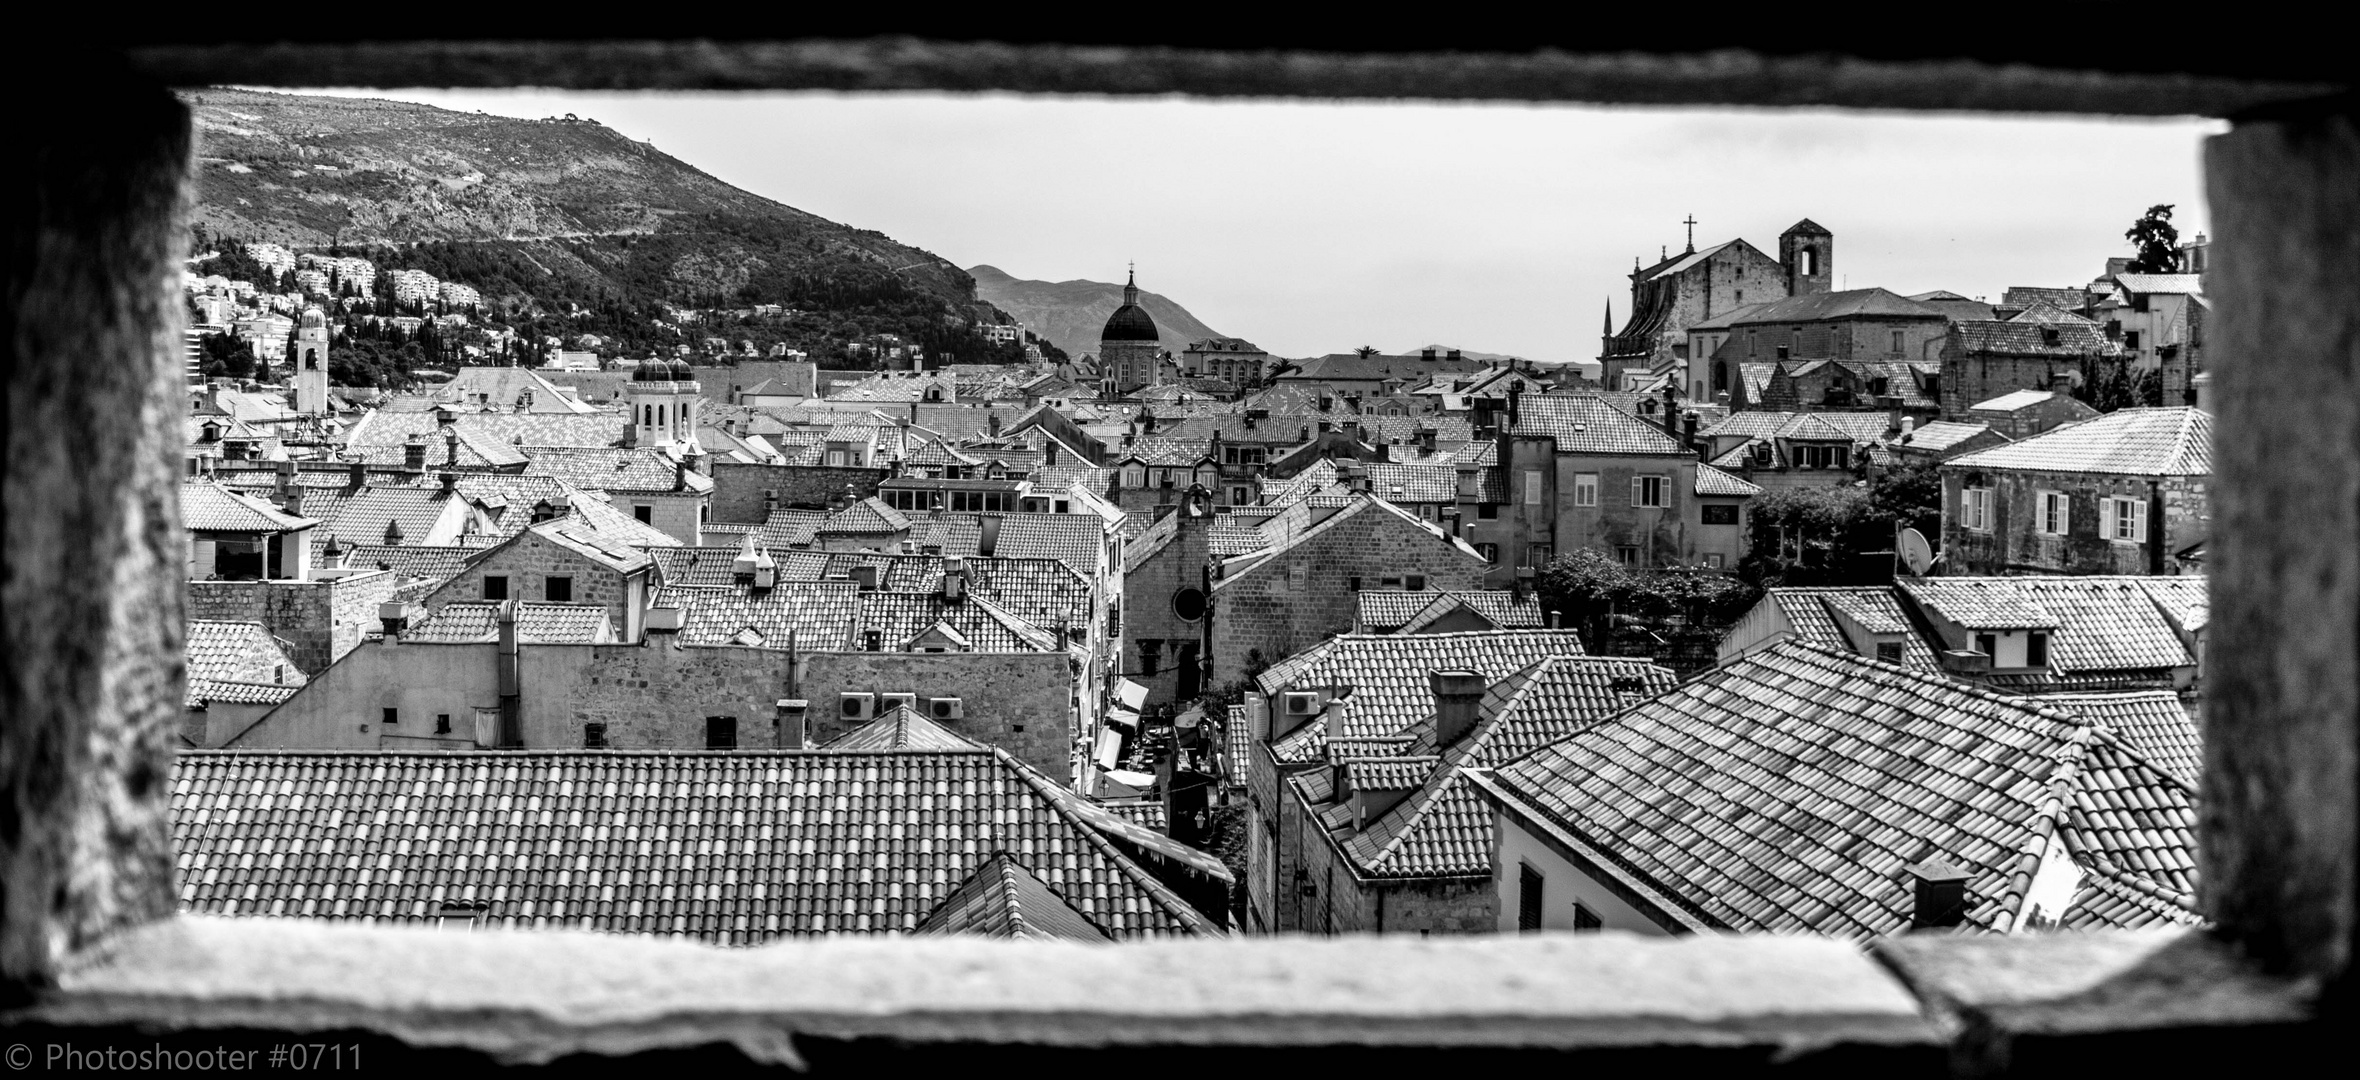 Roofs of Dubrovnik in a Picture